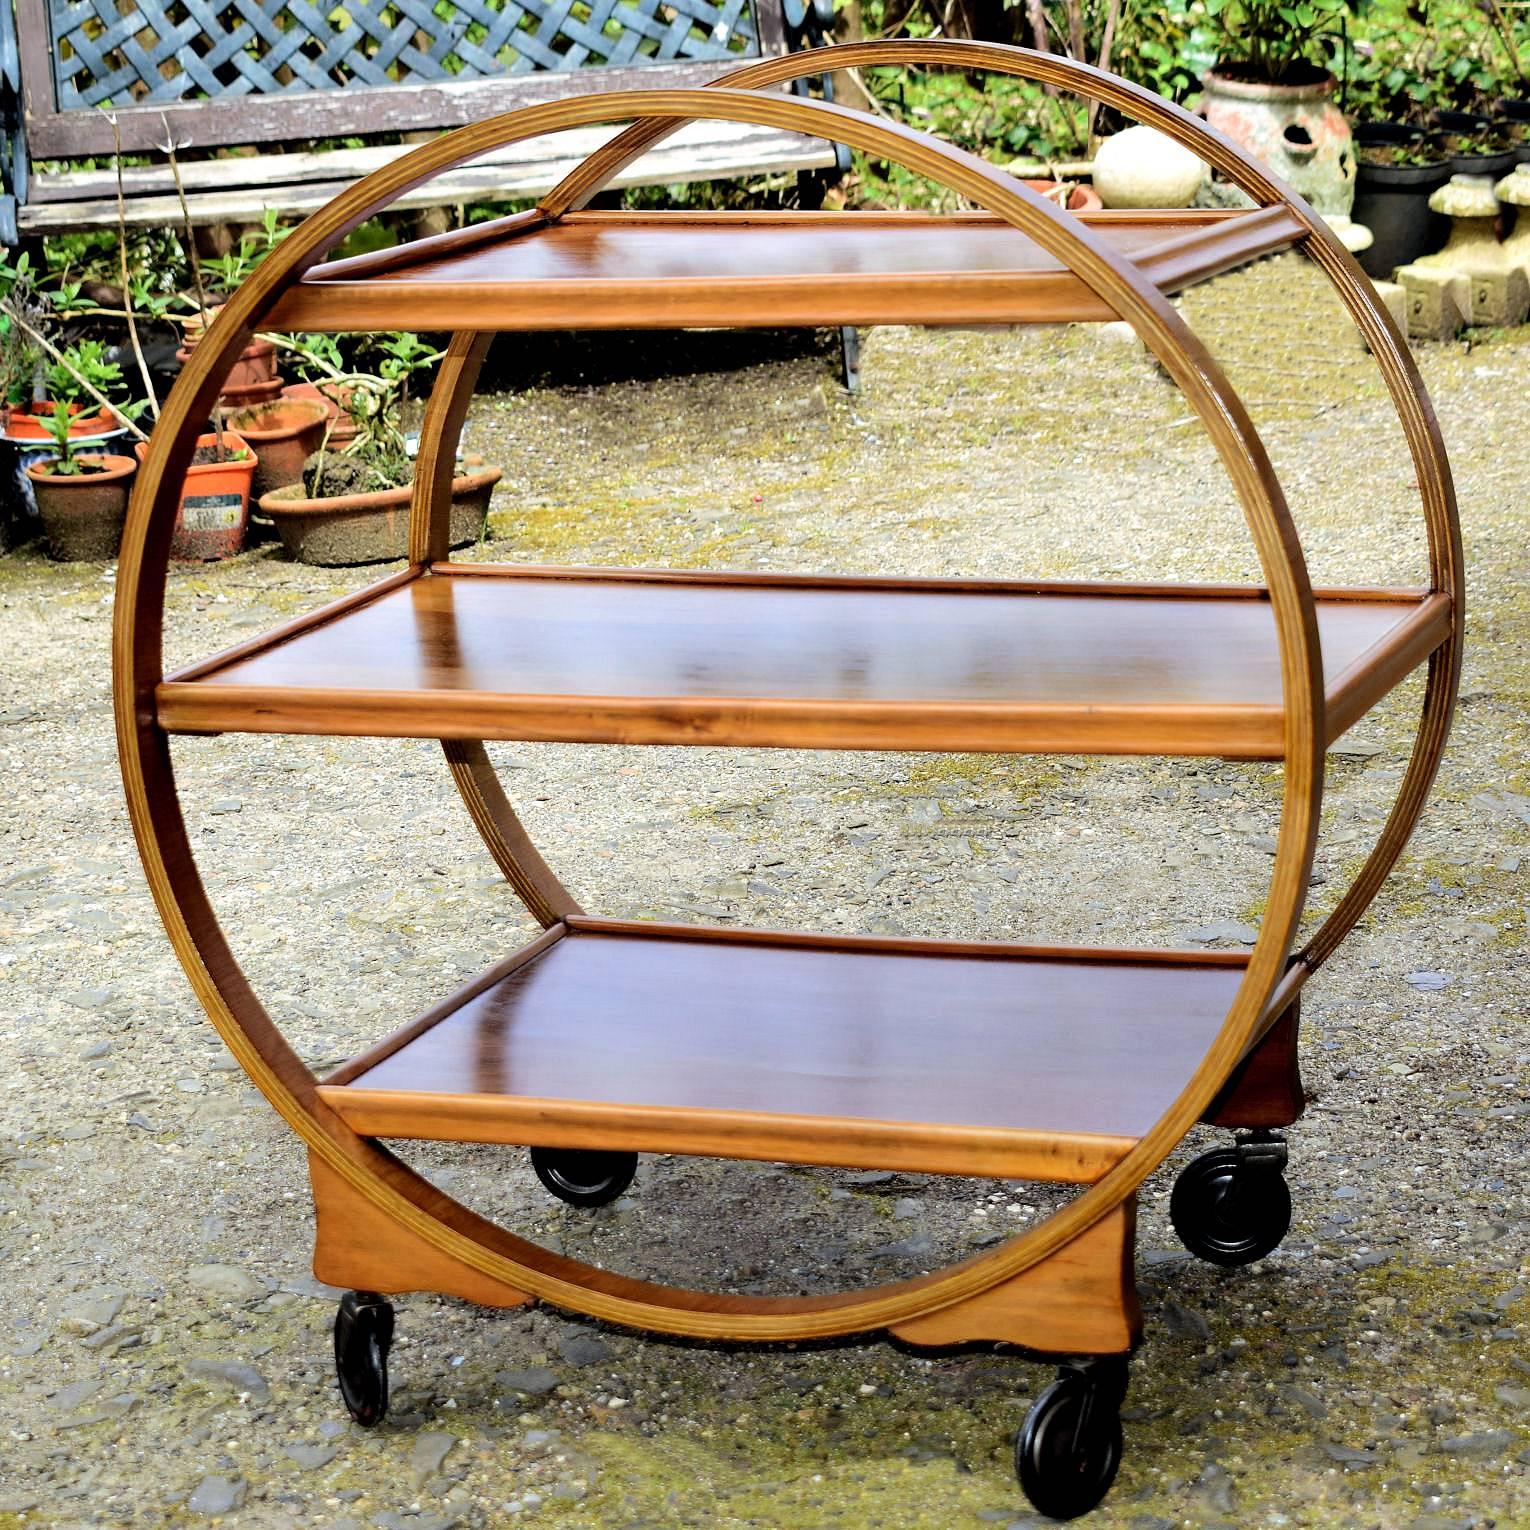 Very attractive and iconic English Art Deco Hostess trolley cart dating from the 1920s-1930s period. This three-tiered trolley not only looks awesome but is very functional too. Veneered in a mid-tone walnut with original fully functioning casters.